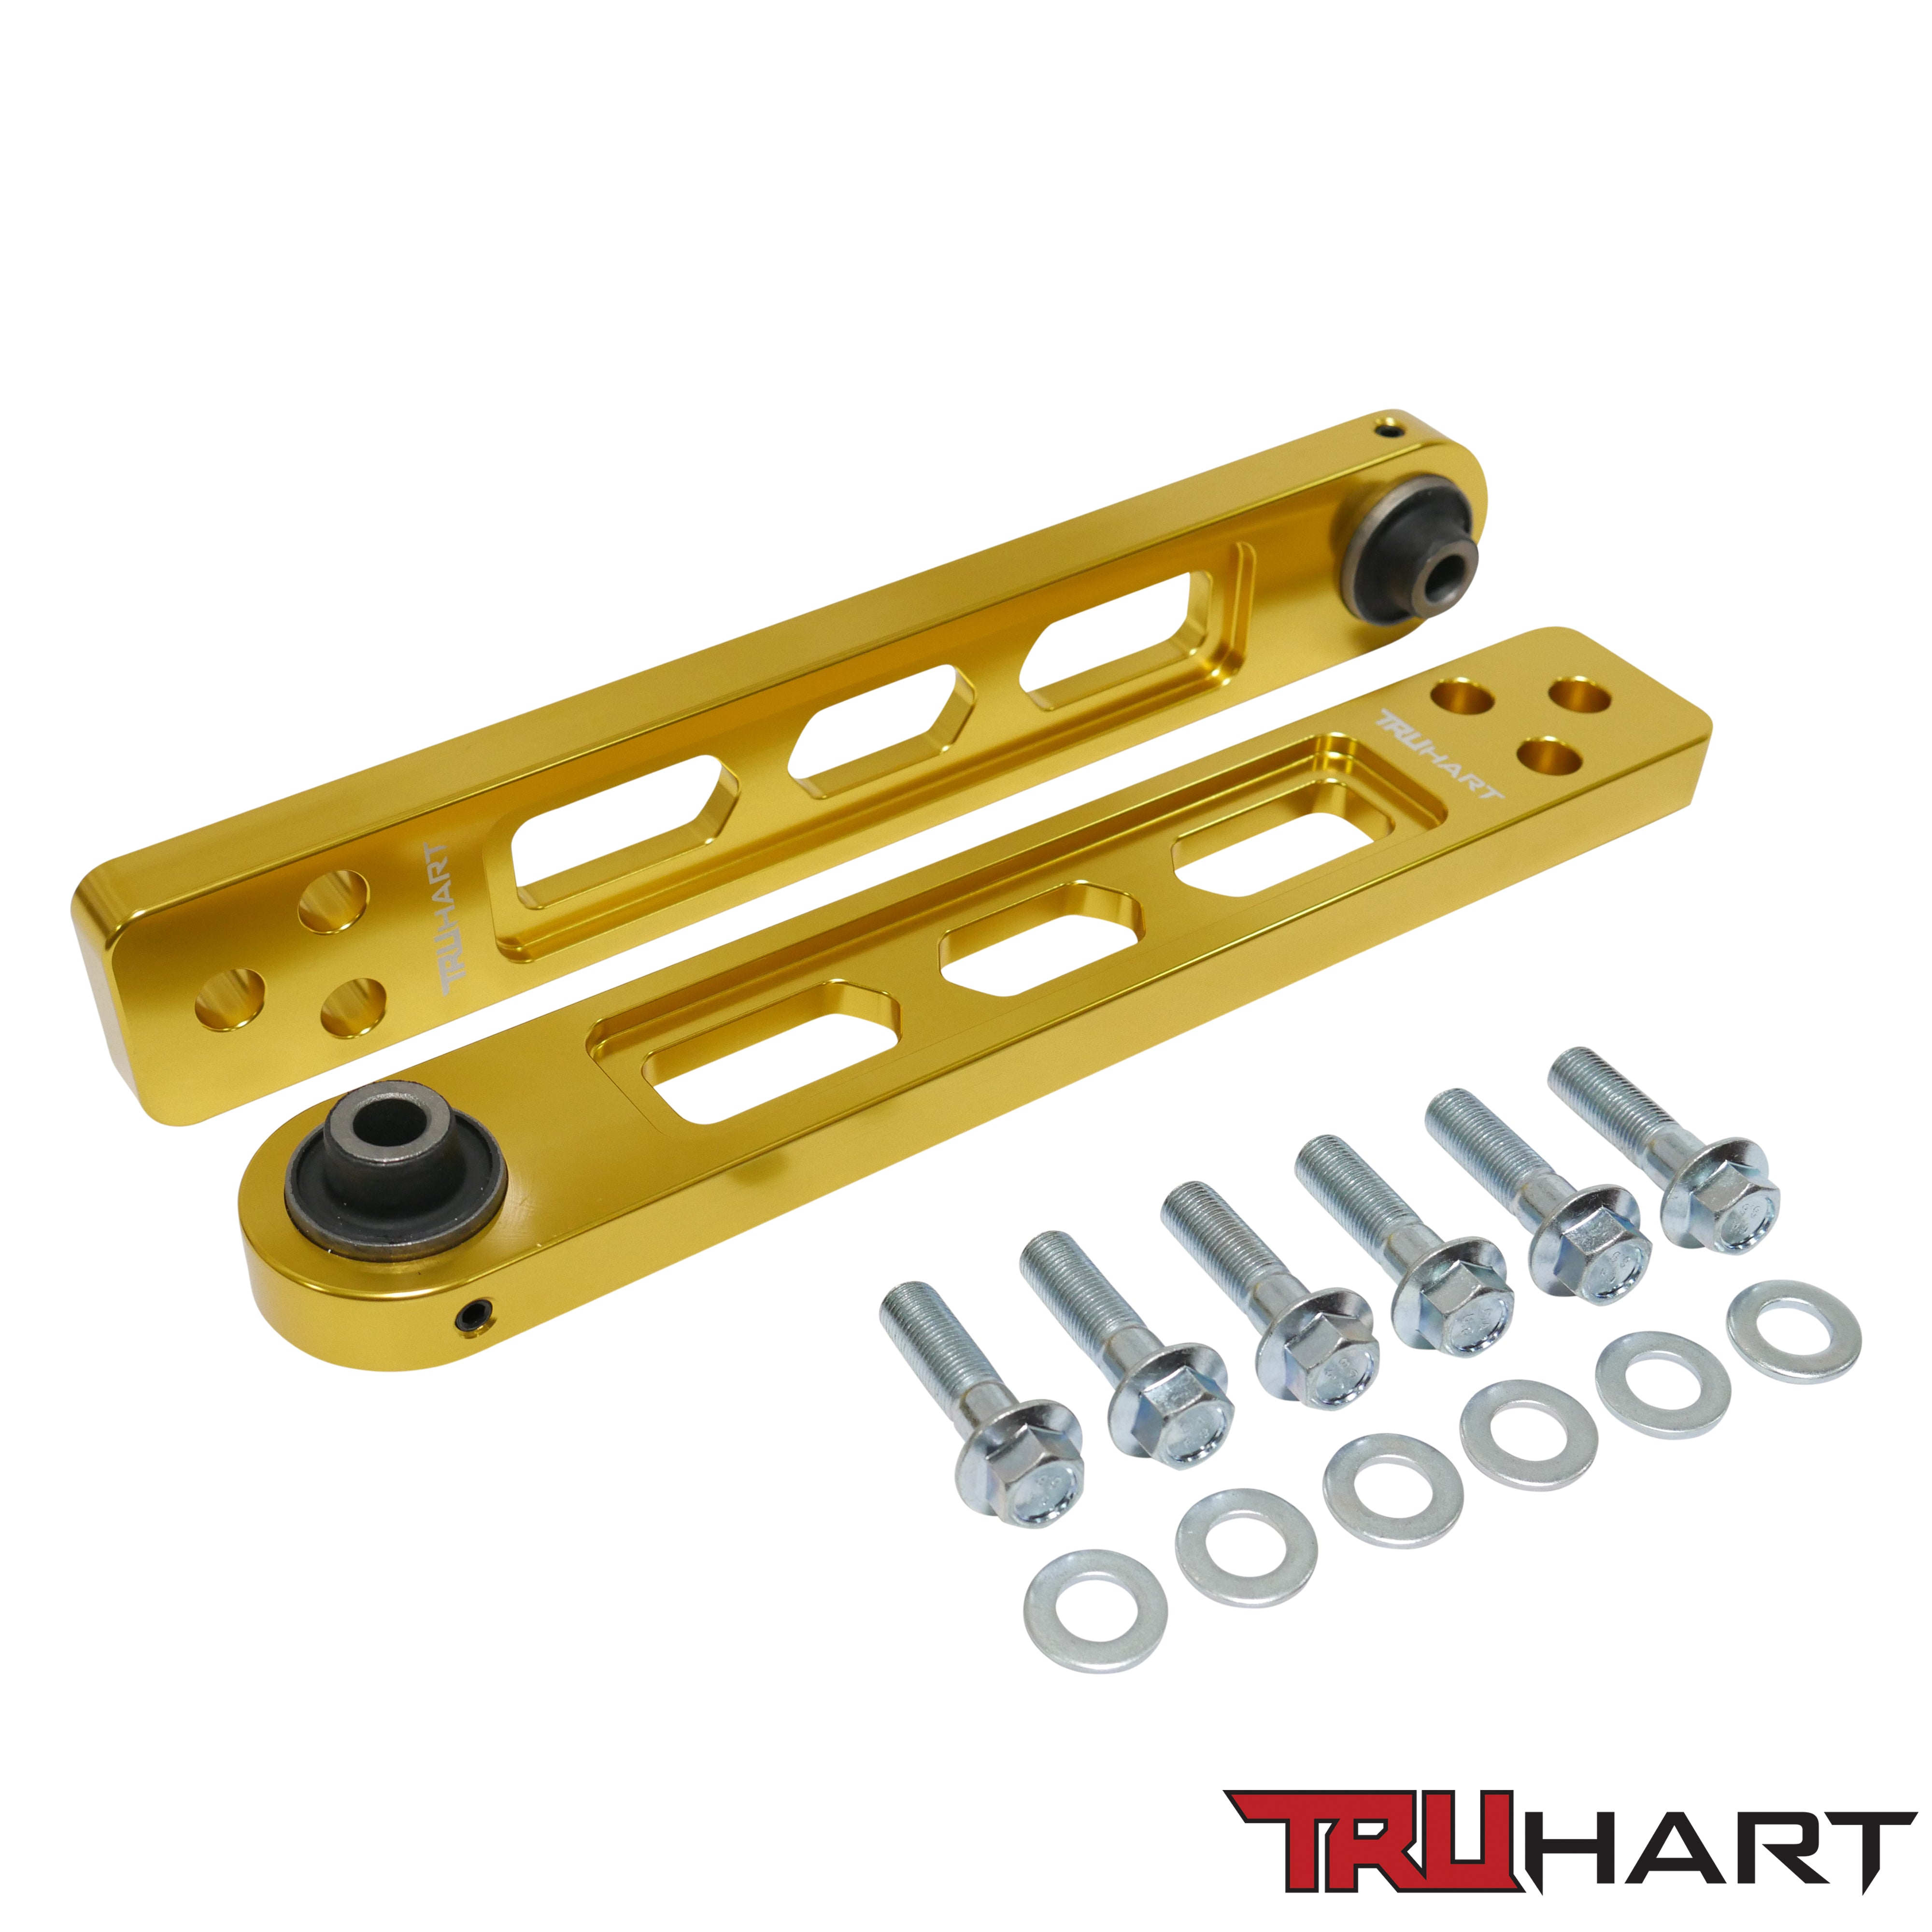 TruHart - Rear Lower Control Arms - Anodized Gold - TH-H103-1-GO - NextGen Tuning